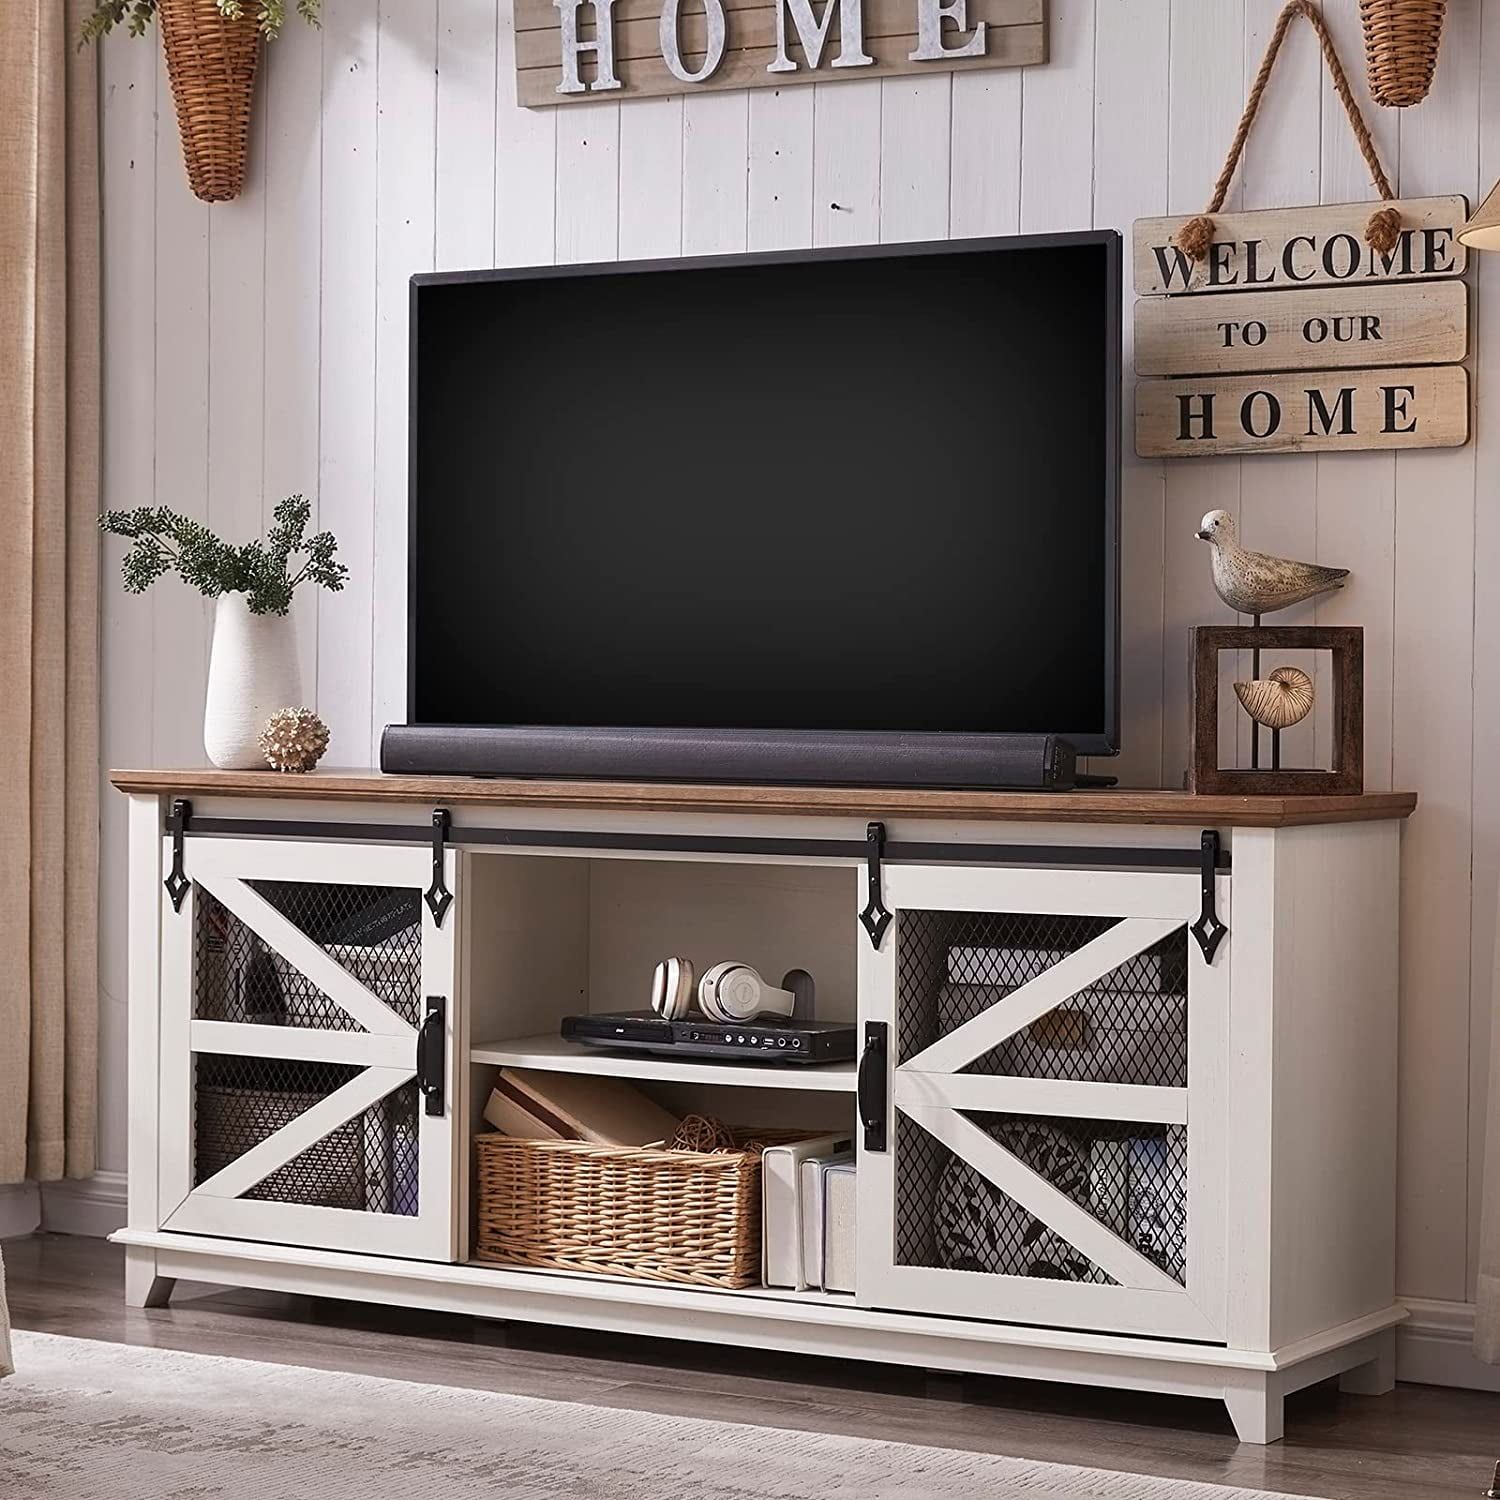 Okd Farmhouse Tv Stand For 75+ Inch Tv, Entertainment Center With  Adjustable Shelves For Living Room, Antique White – Walmart In Farmhouse Stands With Shelves (Photo 9 of 15)